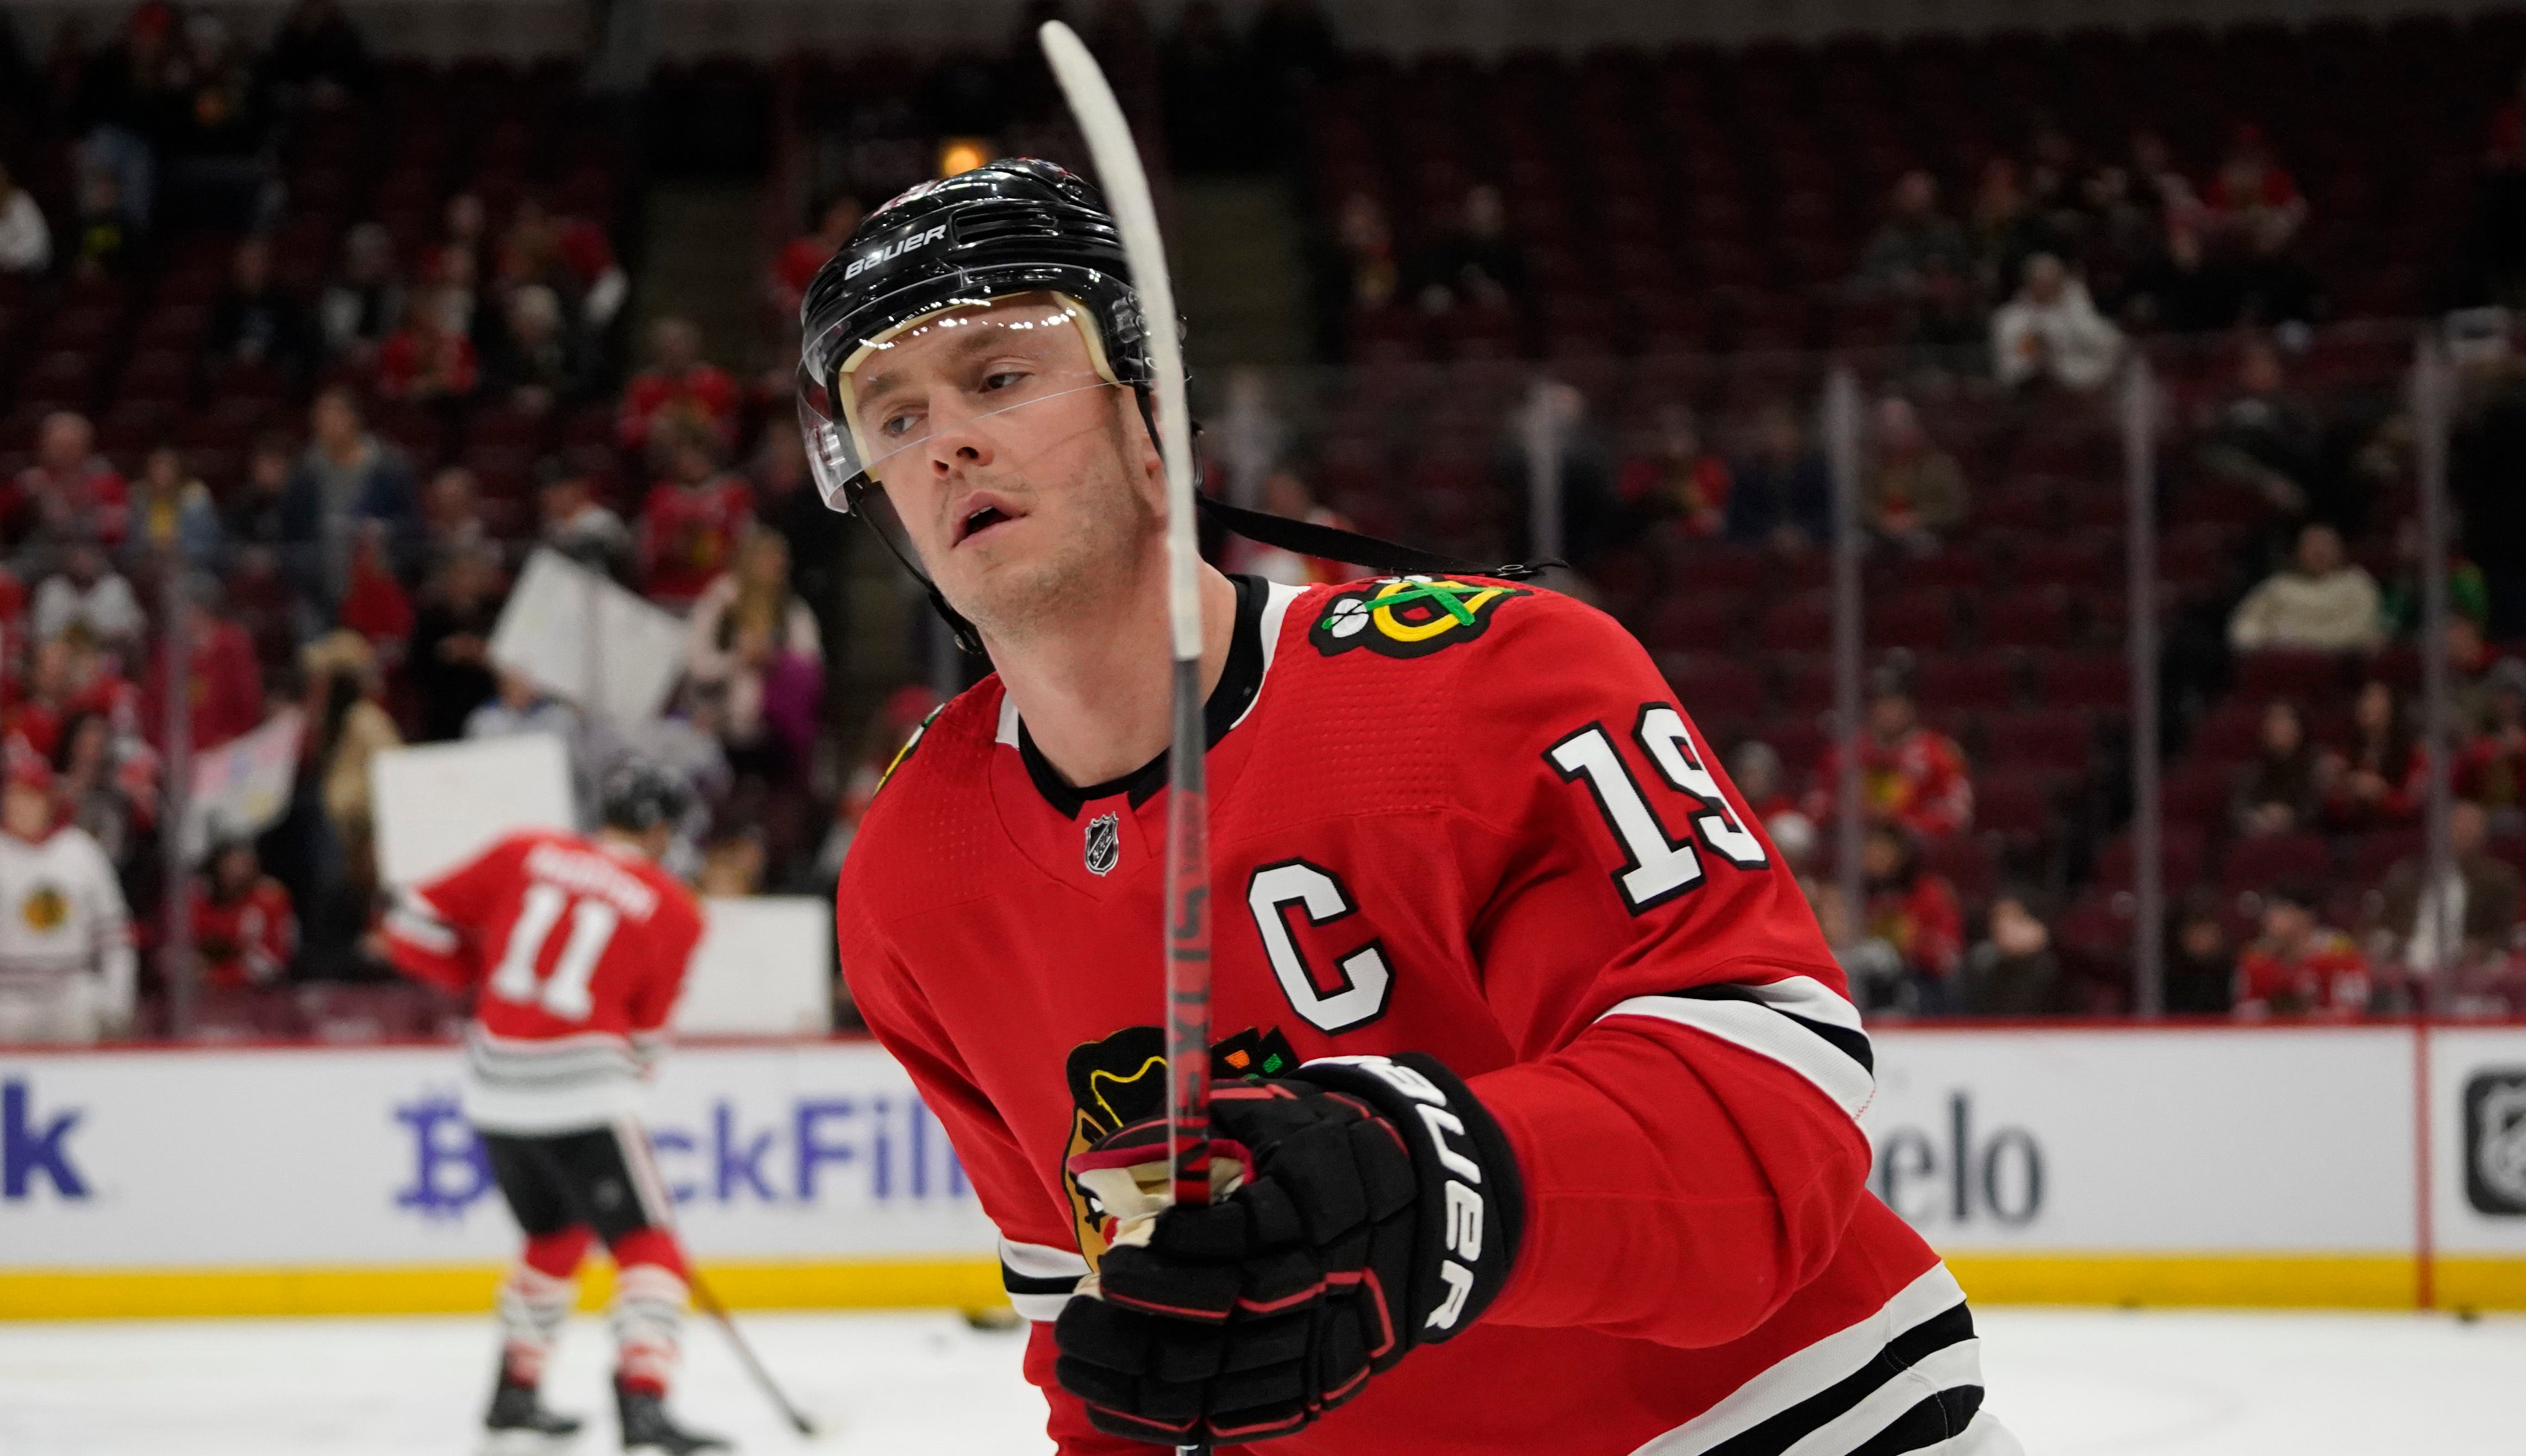 Blackhawks' Jonathan Toews returns Saturday vs. Devils after two-month absence